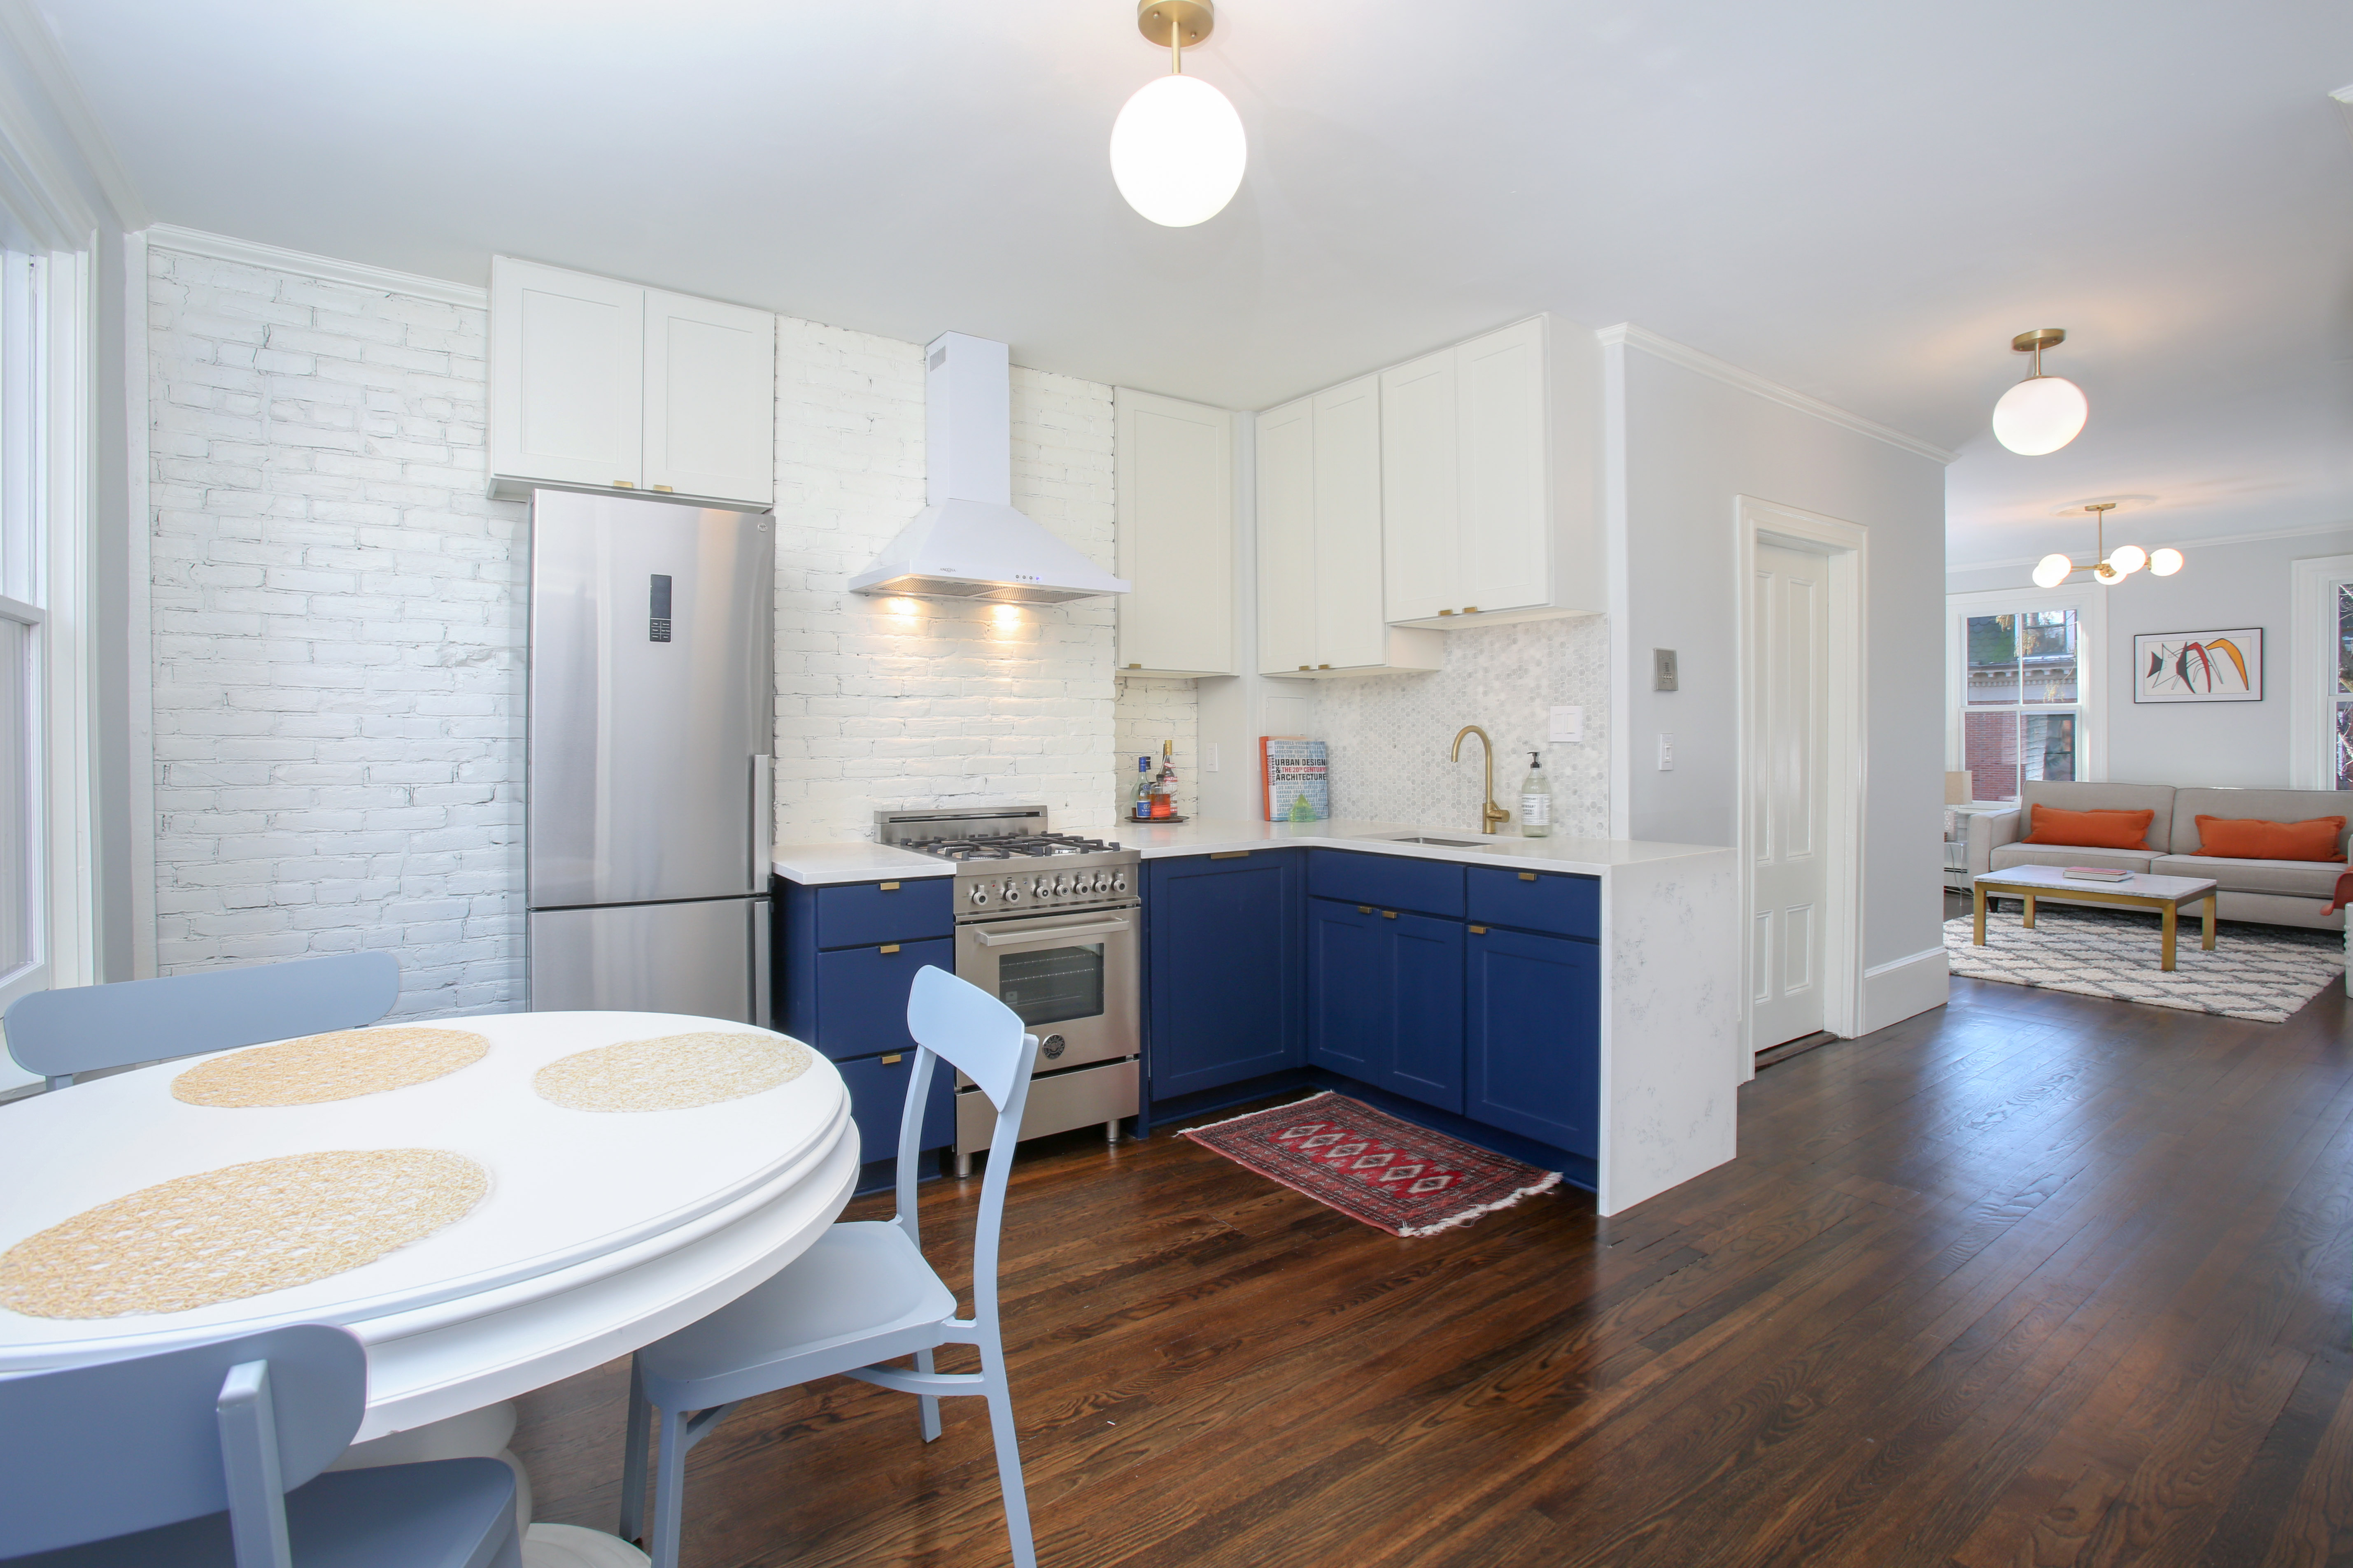 [Just Listed] Stylish & Bright 1 Bedroom Condo in the South End